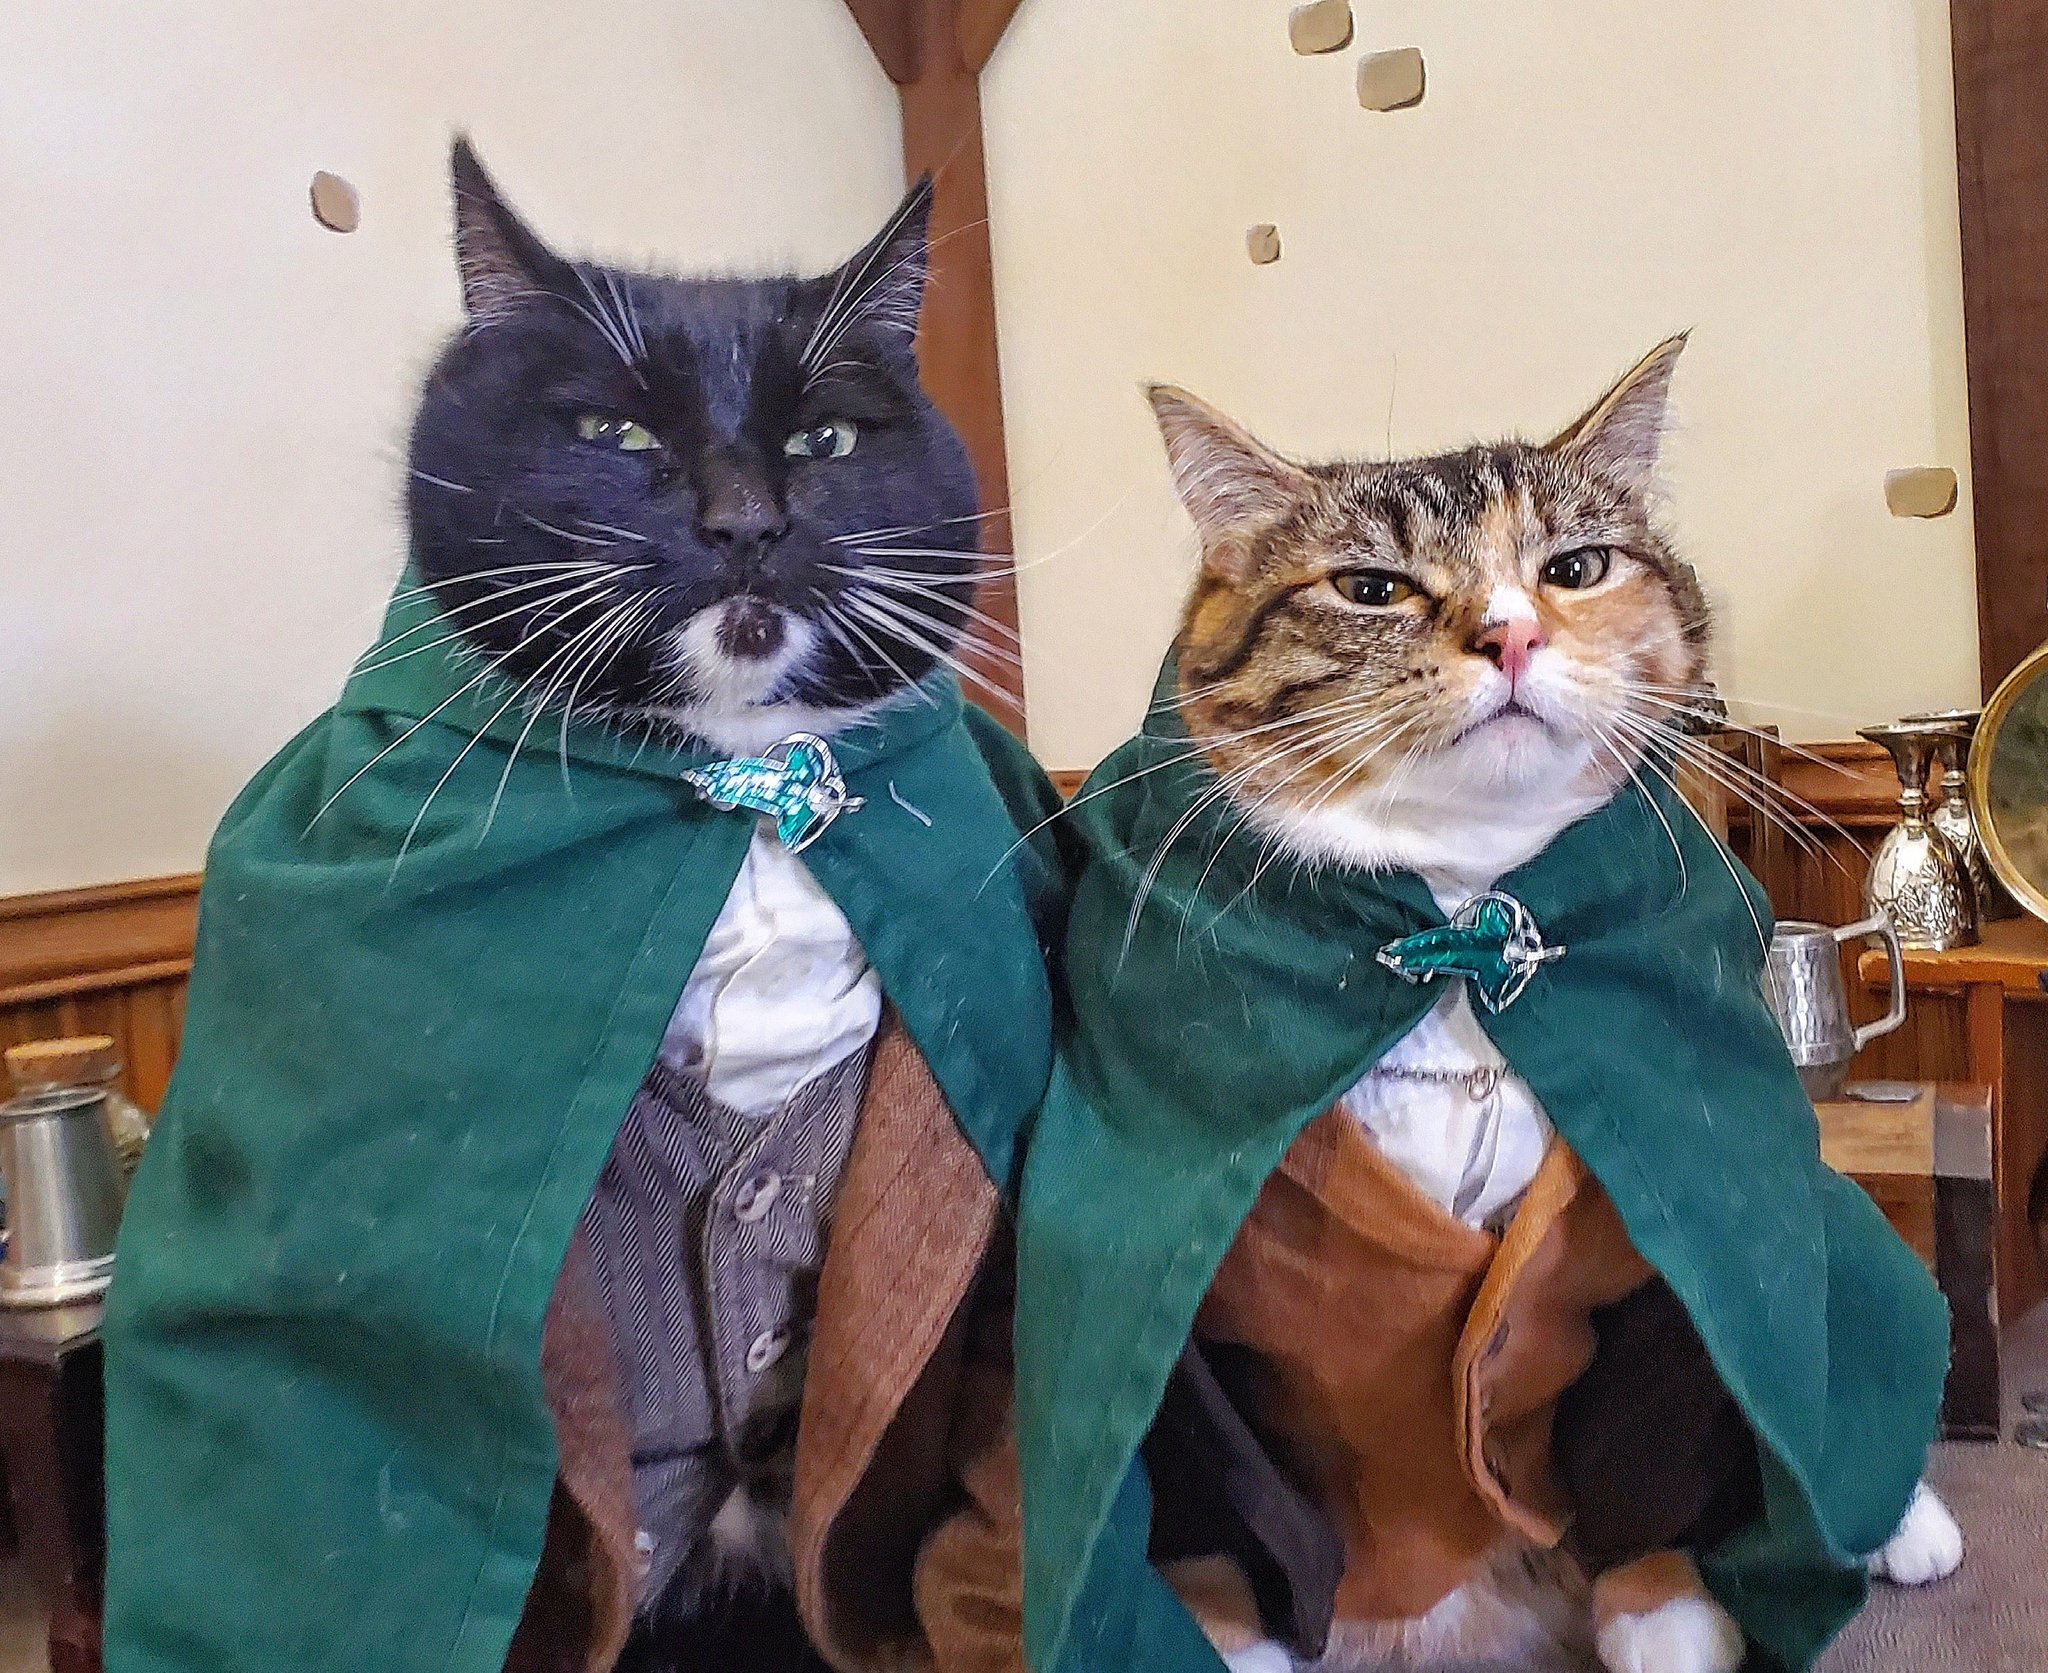 Cat Cosplay on Twitter: LOTR Fans this morning when they investigate Frodo  Trending https://t.co/ccYhNLrvUL / Twitter